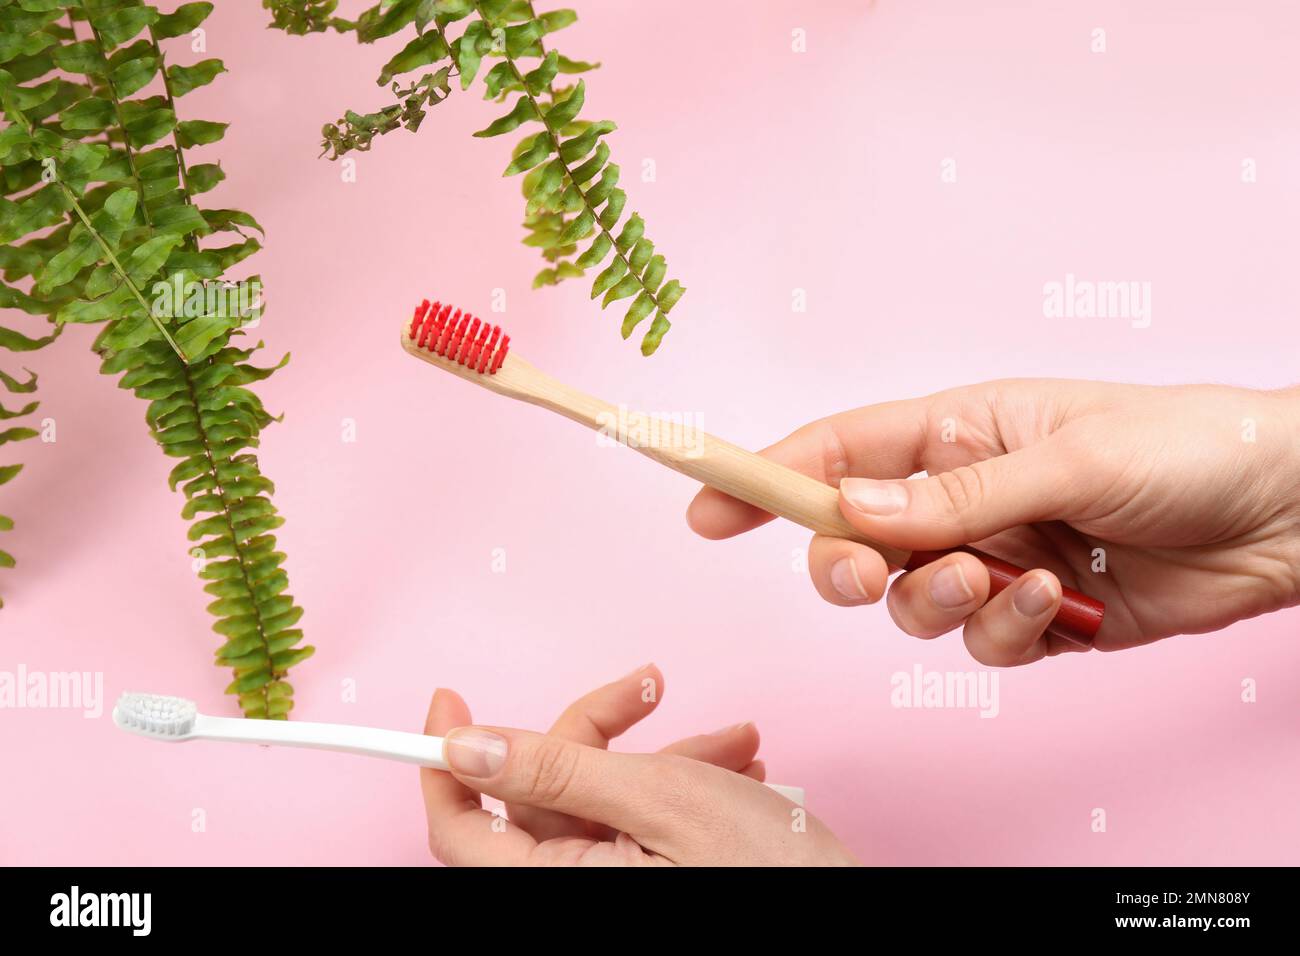 Woman holding natural bamboo and plastic toothbrushes on pink background Stock Photo